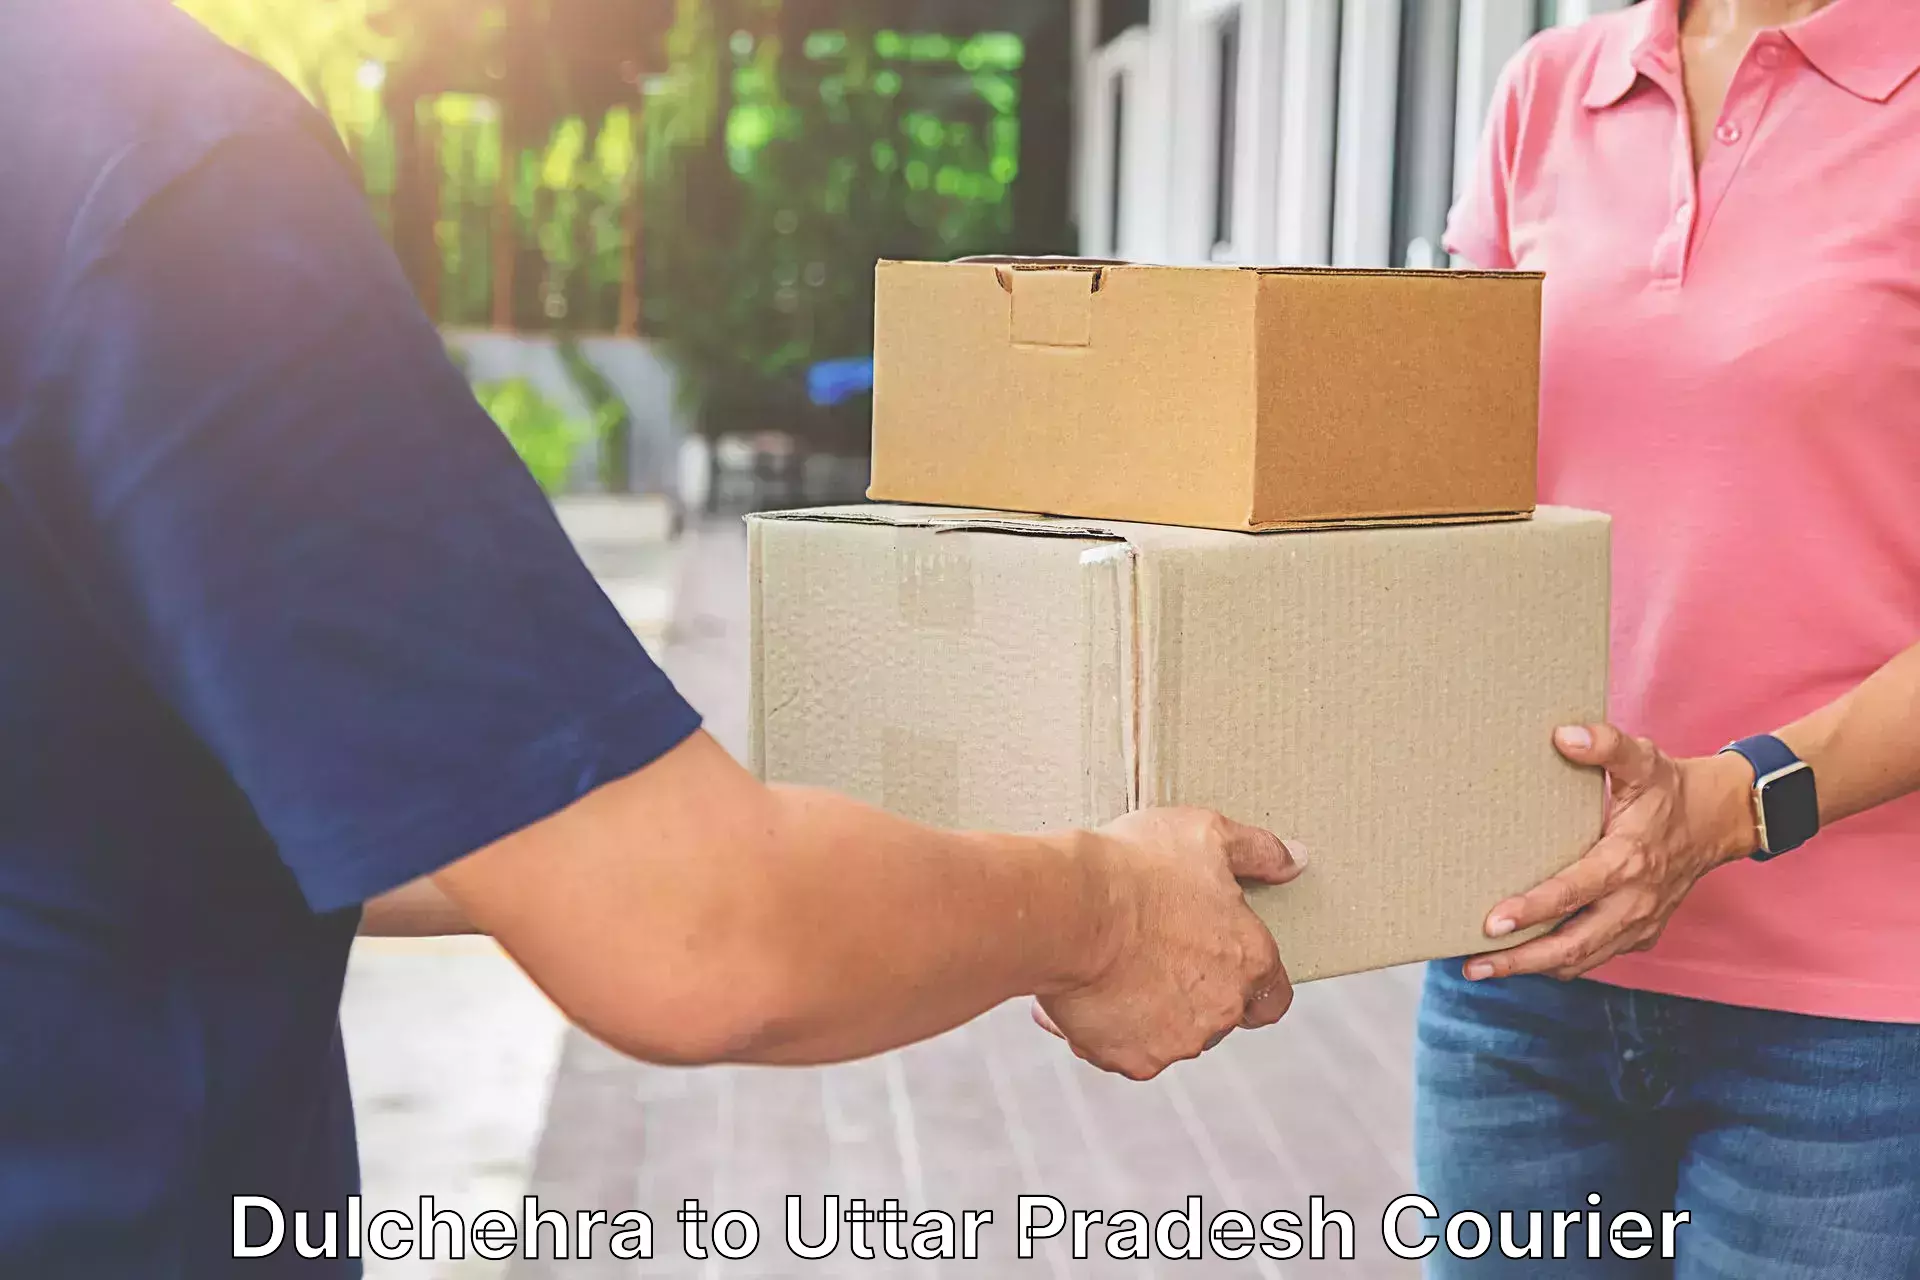 Reliable courier service Dulchehra to Rajesultanpur